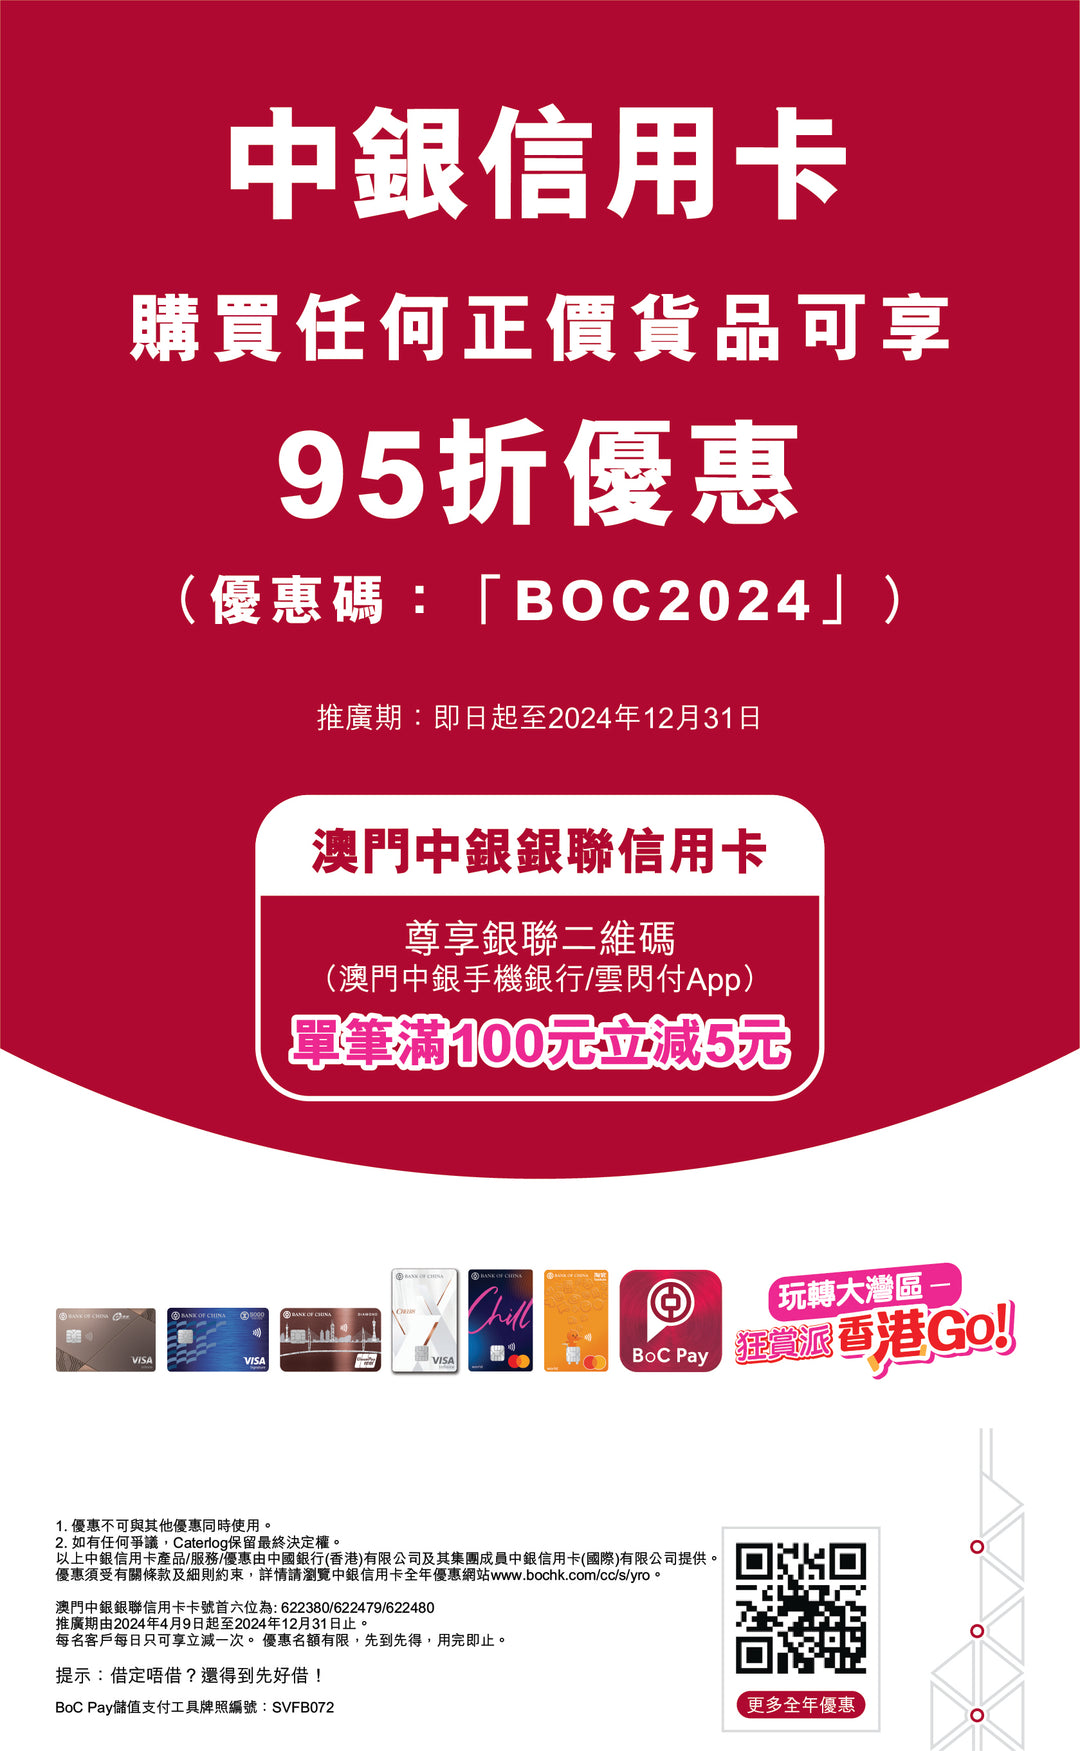 Bank of China special offer 5% off 